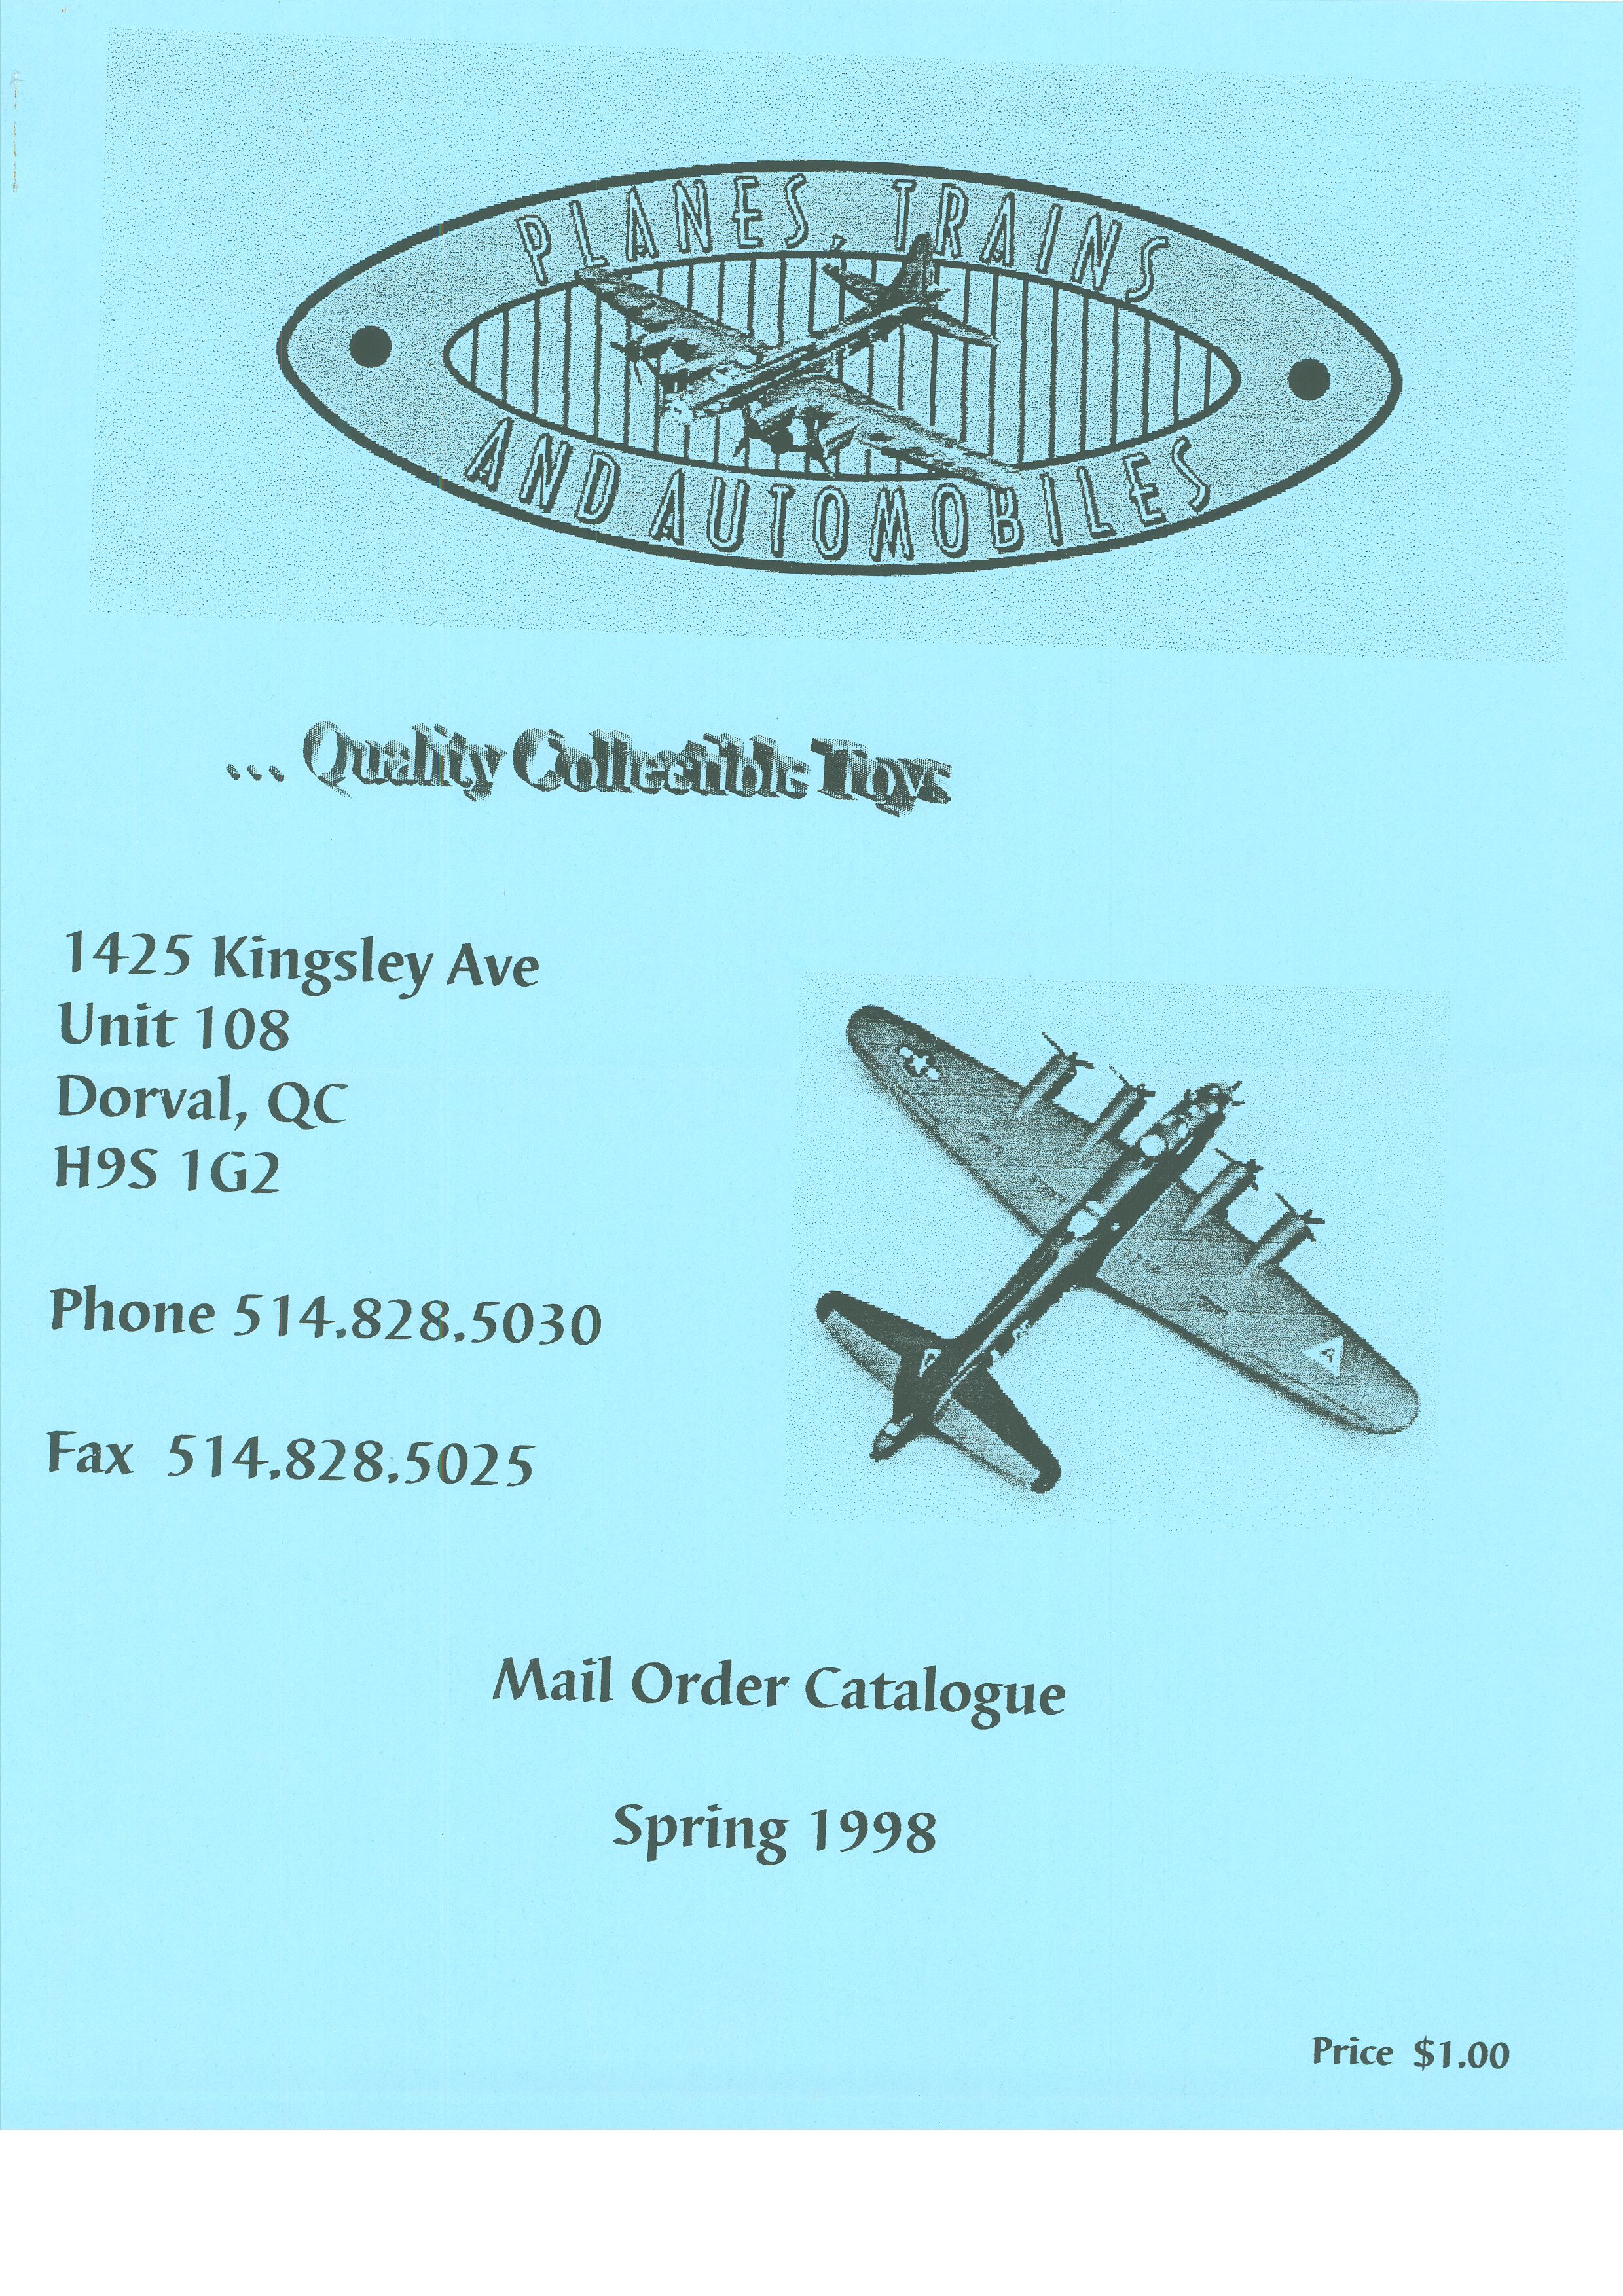 Planes, trains and Automobiles - mail Order catalogue 199810.jpg